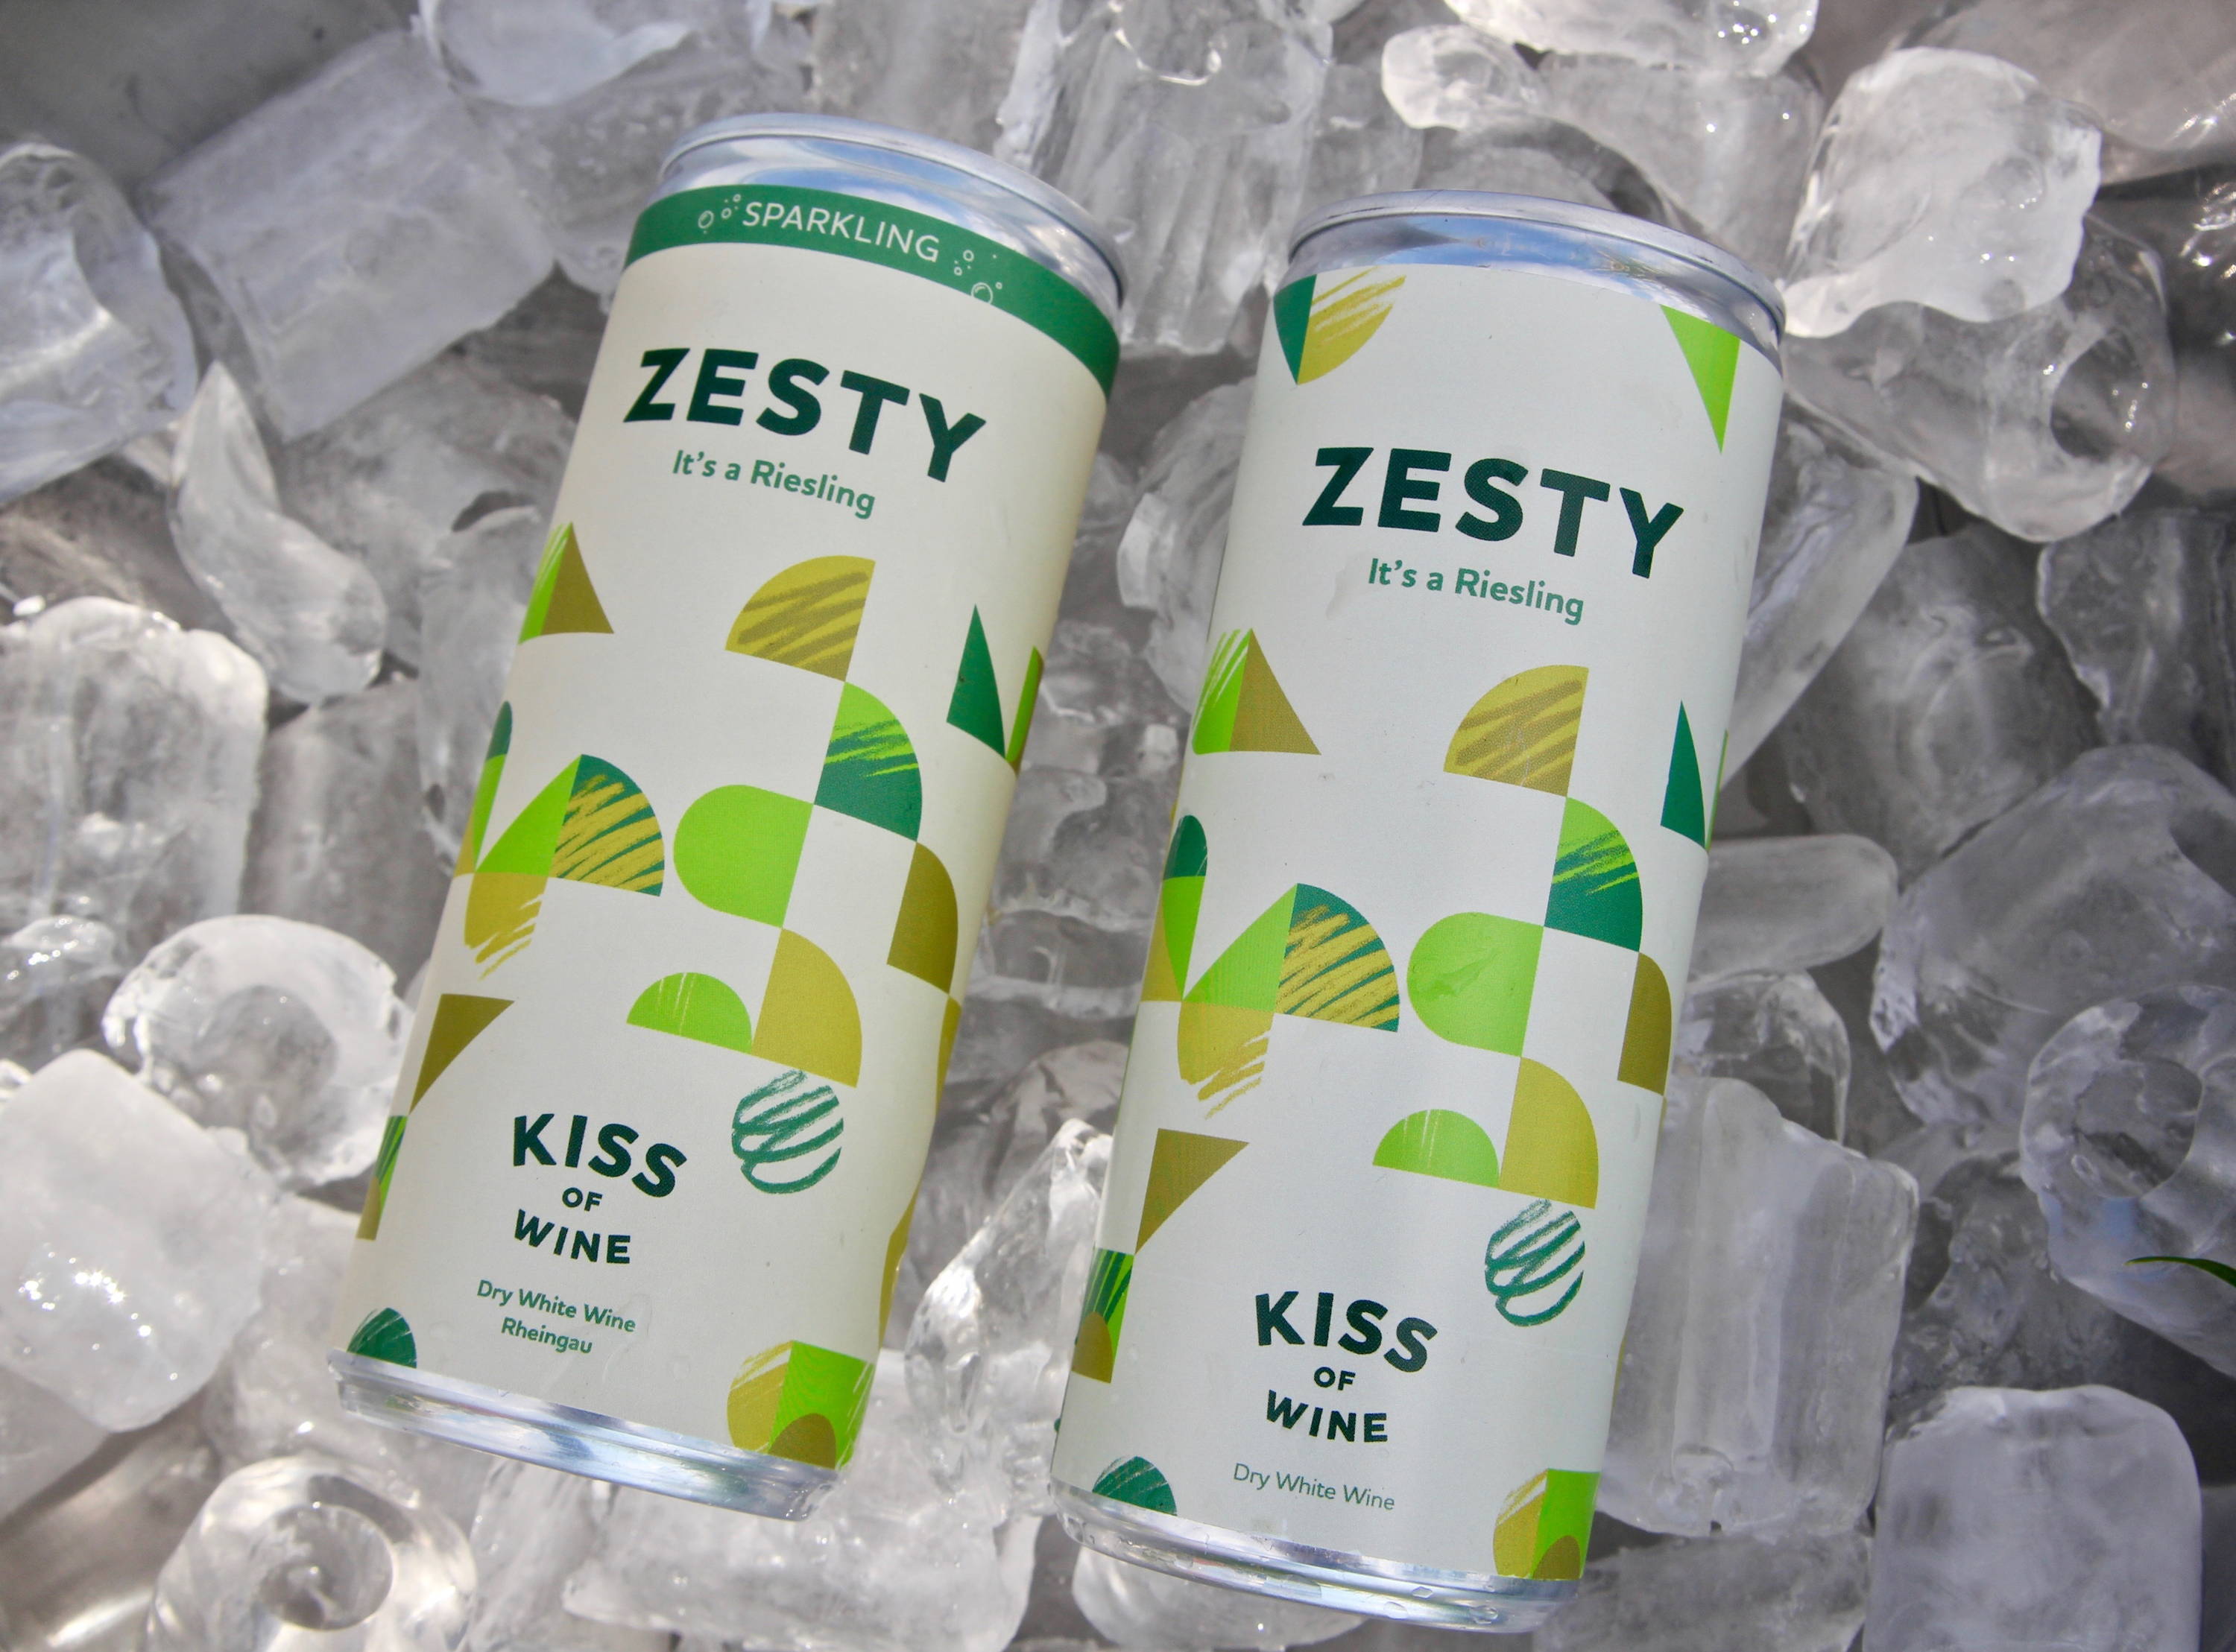 Kiss of Wine Zesty Riesling canned wine showing the qualities of a perfect zesty wine type.